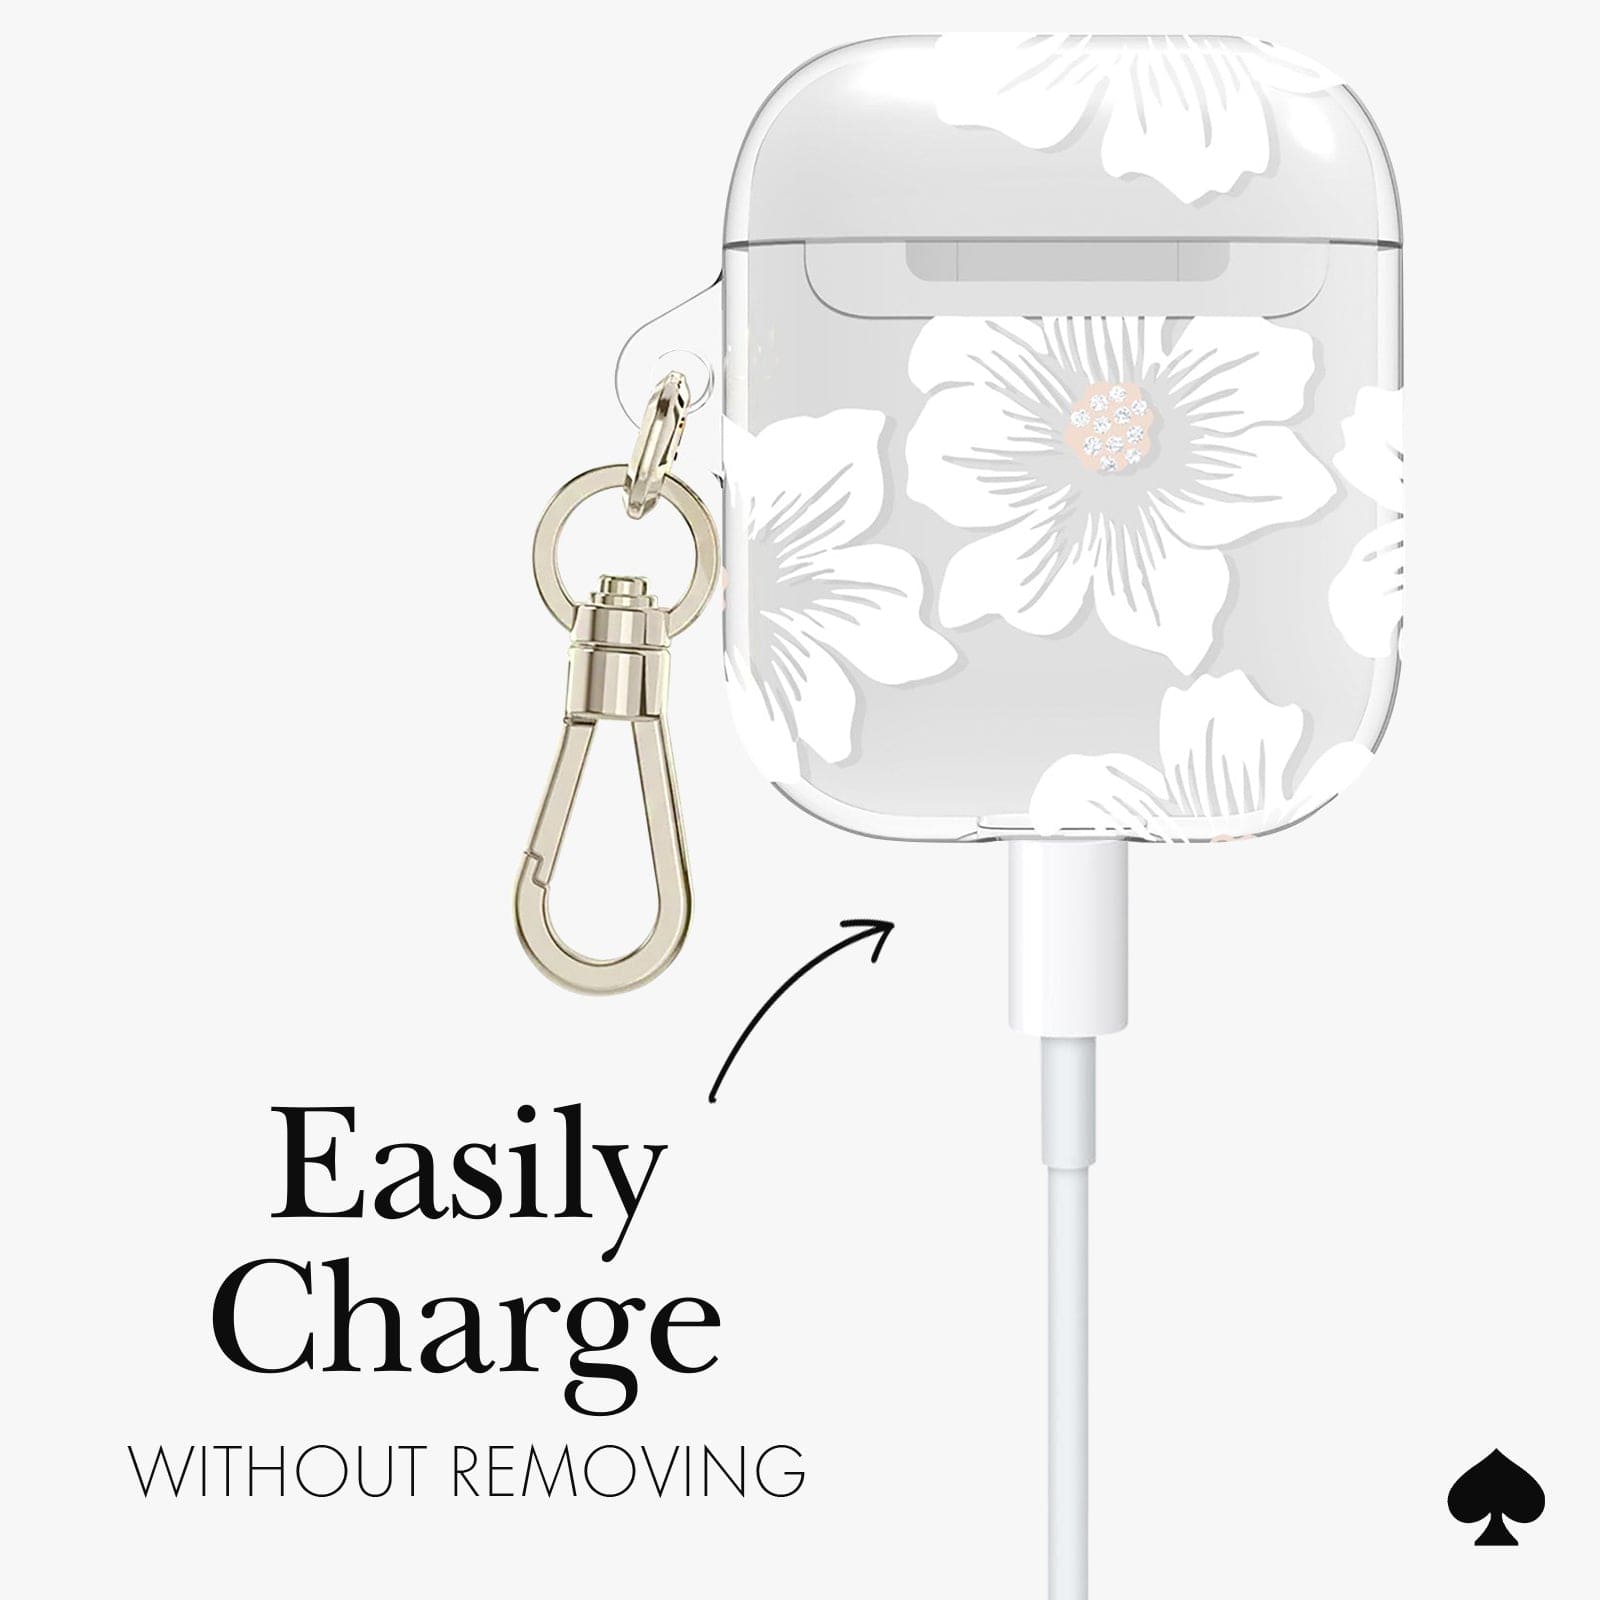 EASILY CHARGE WITHOUT REMOVING